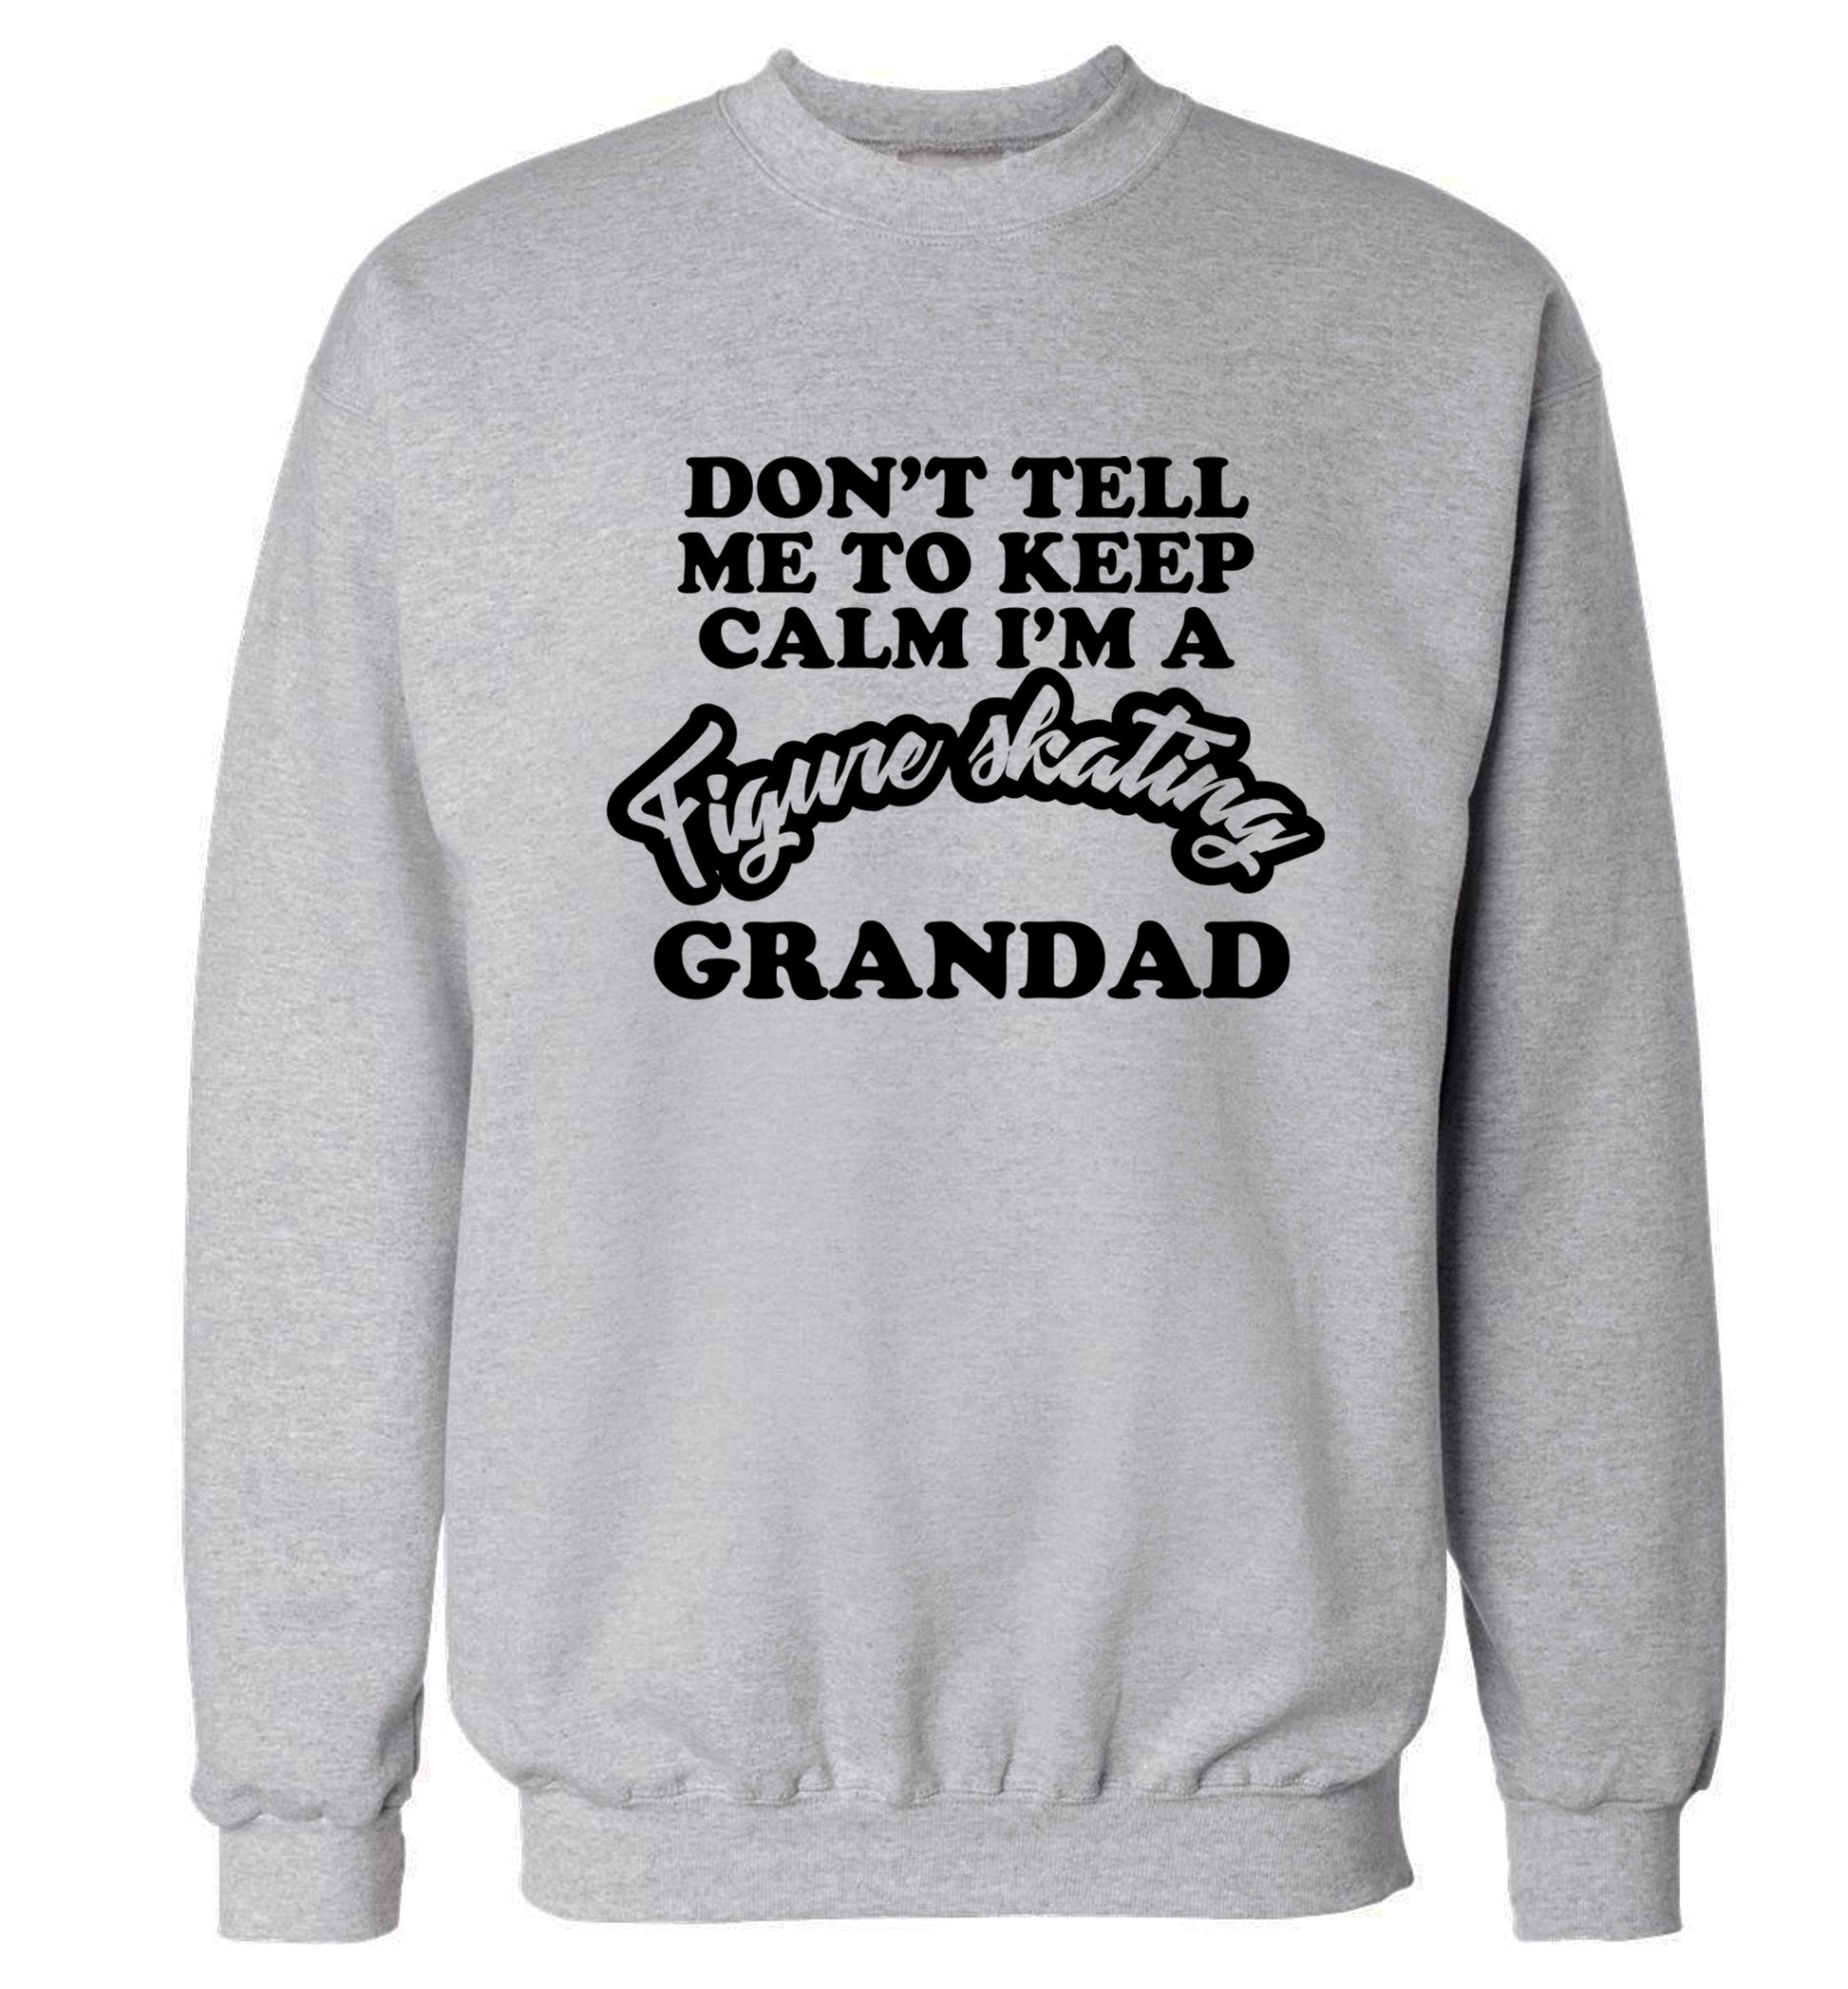 Don't tell me to keep calm I'm a figure skating grandad Adult's unisexgrey Sweater 2XL